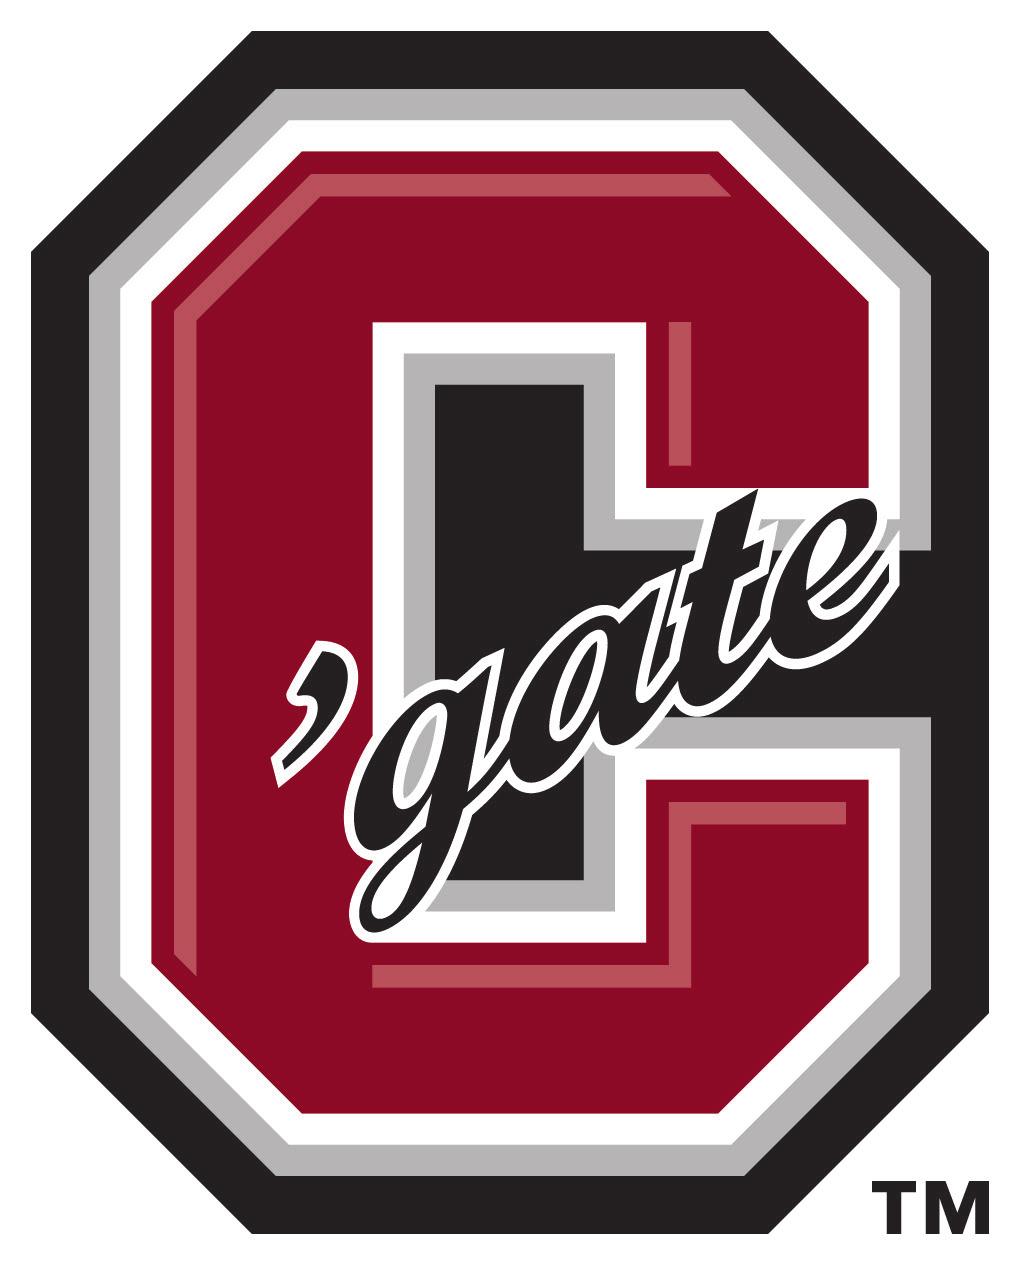 COLGATE S RECORD WHEN... Scoring at least 90 points... 0-0 Scoring at least 80 points... 0-1 Scoring at least 70 points... 0-1 Scoring at least 60 points... 1-1 Scoring at least 50 points.